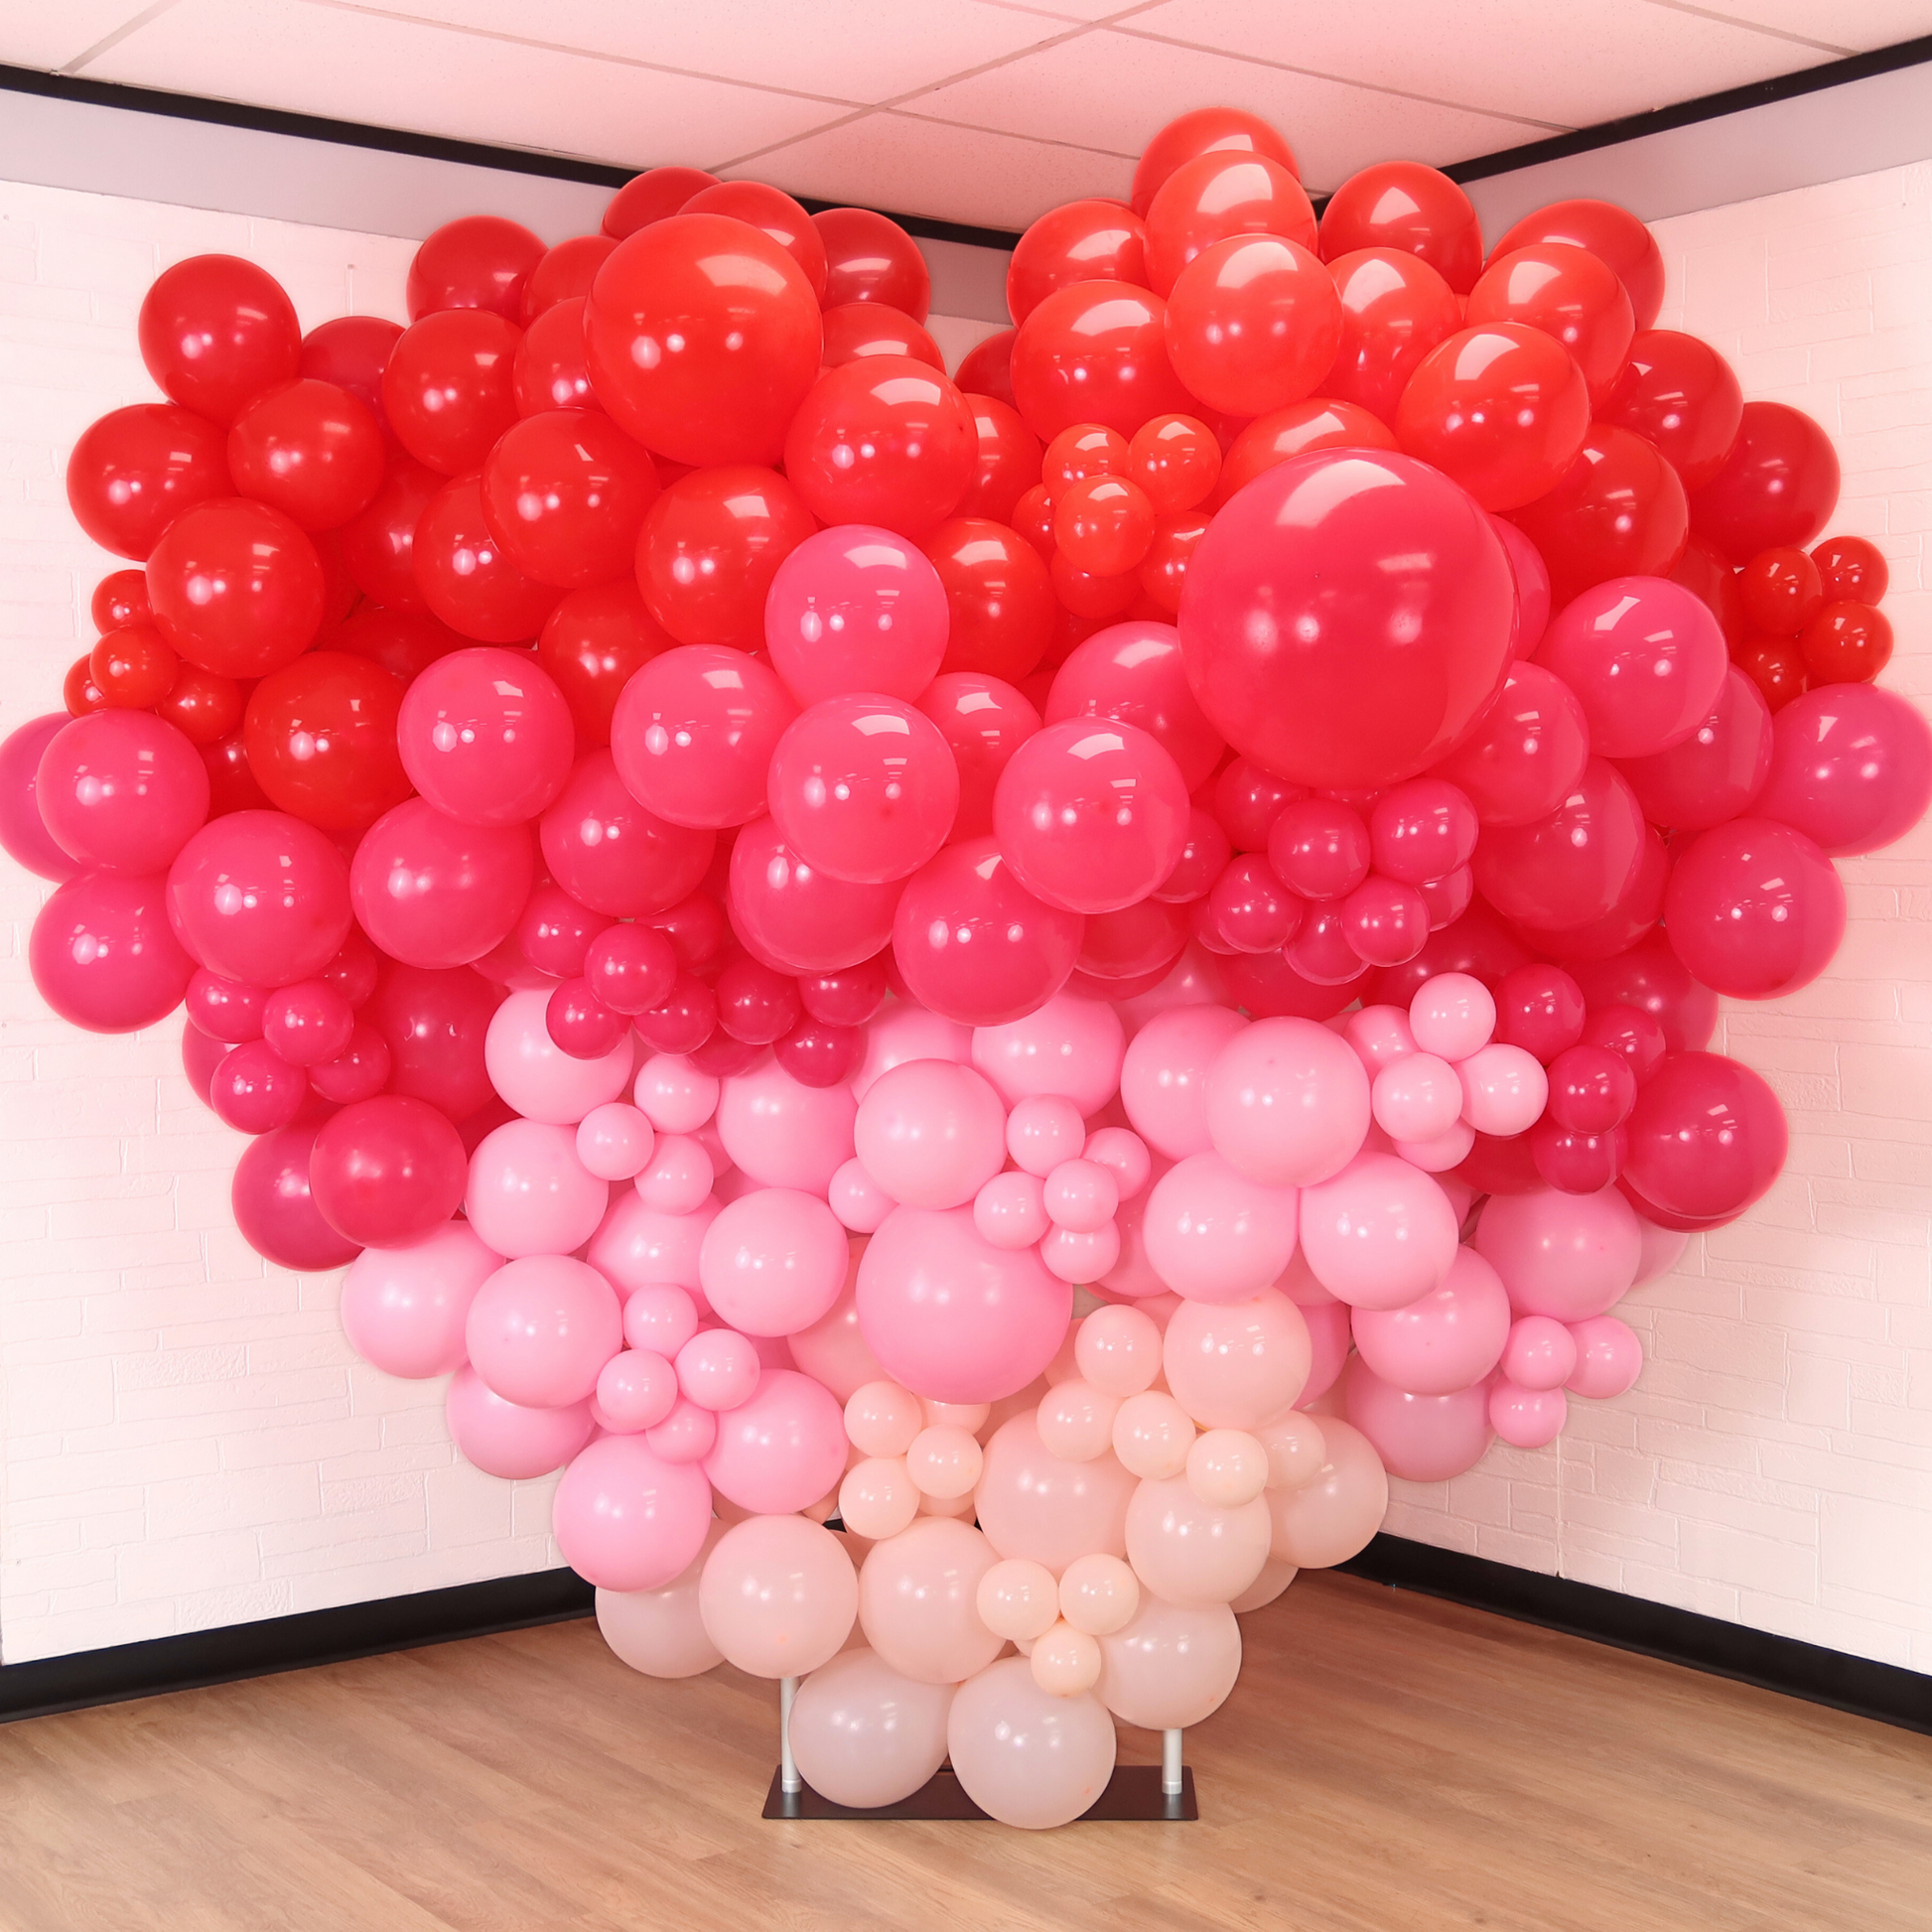 Red 18" Large Round Latex Balloons | 10 pcs